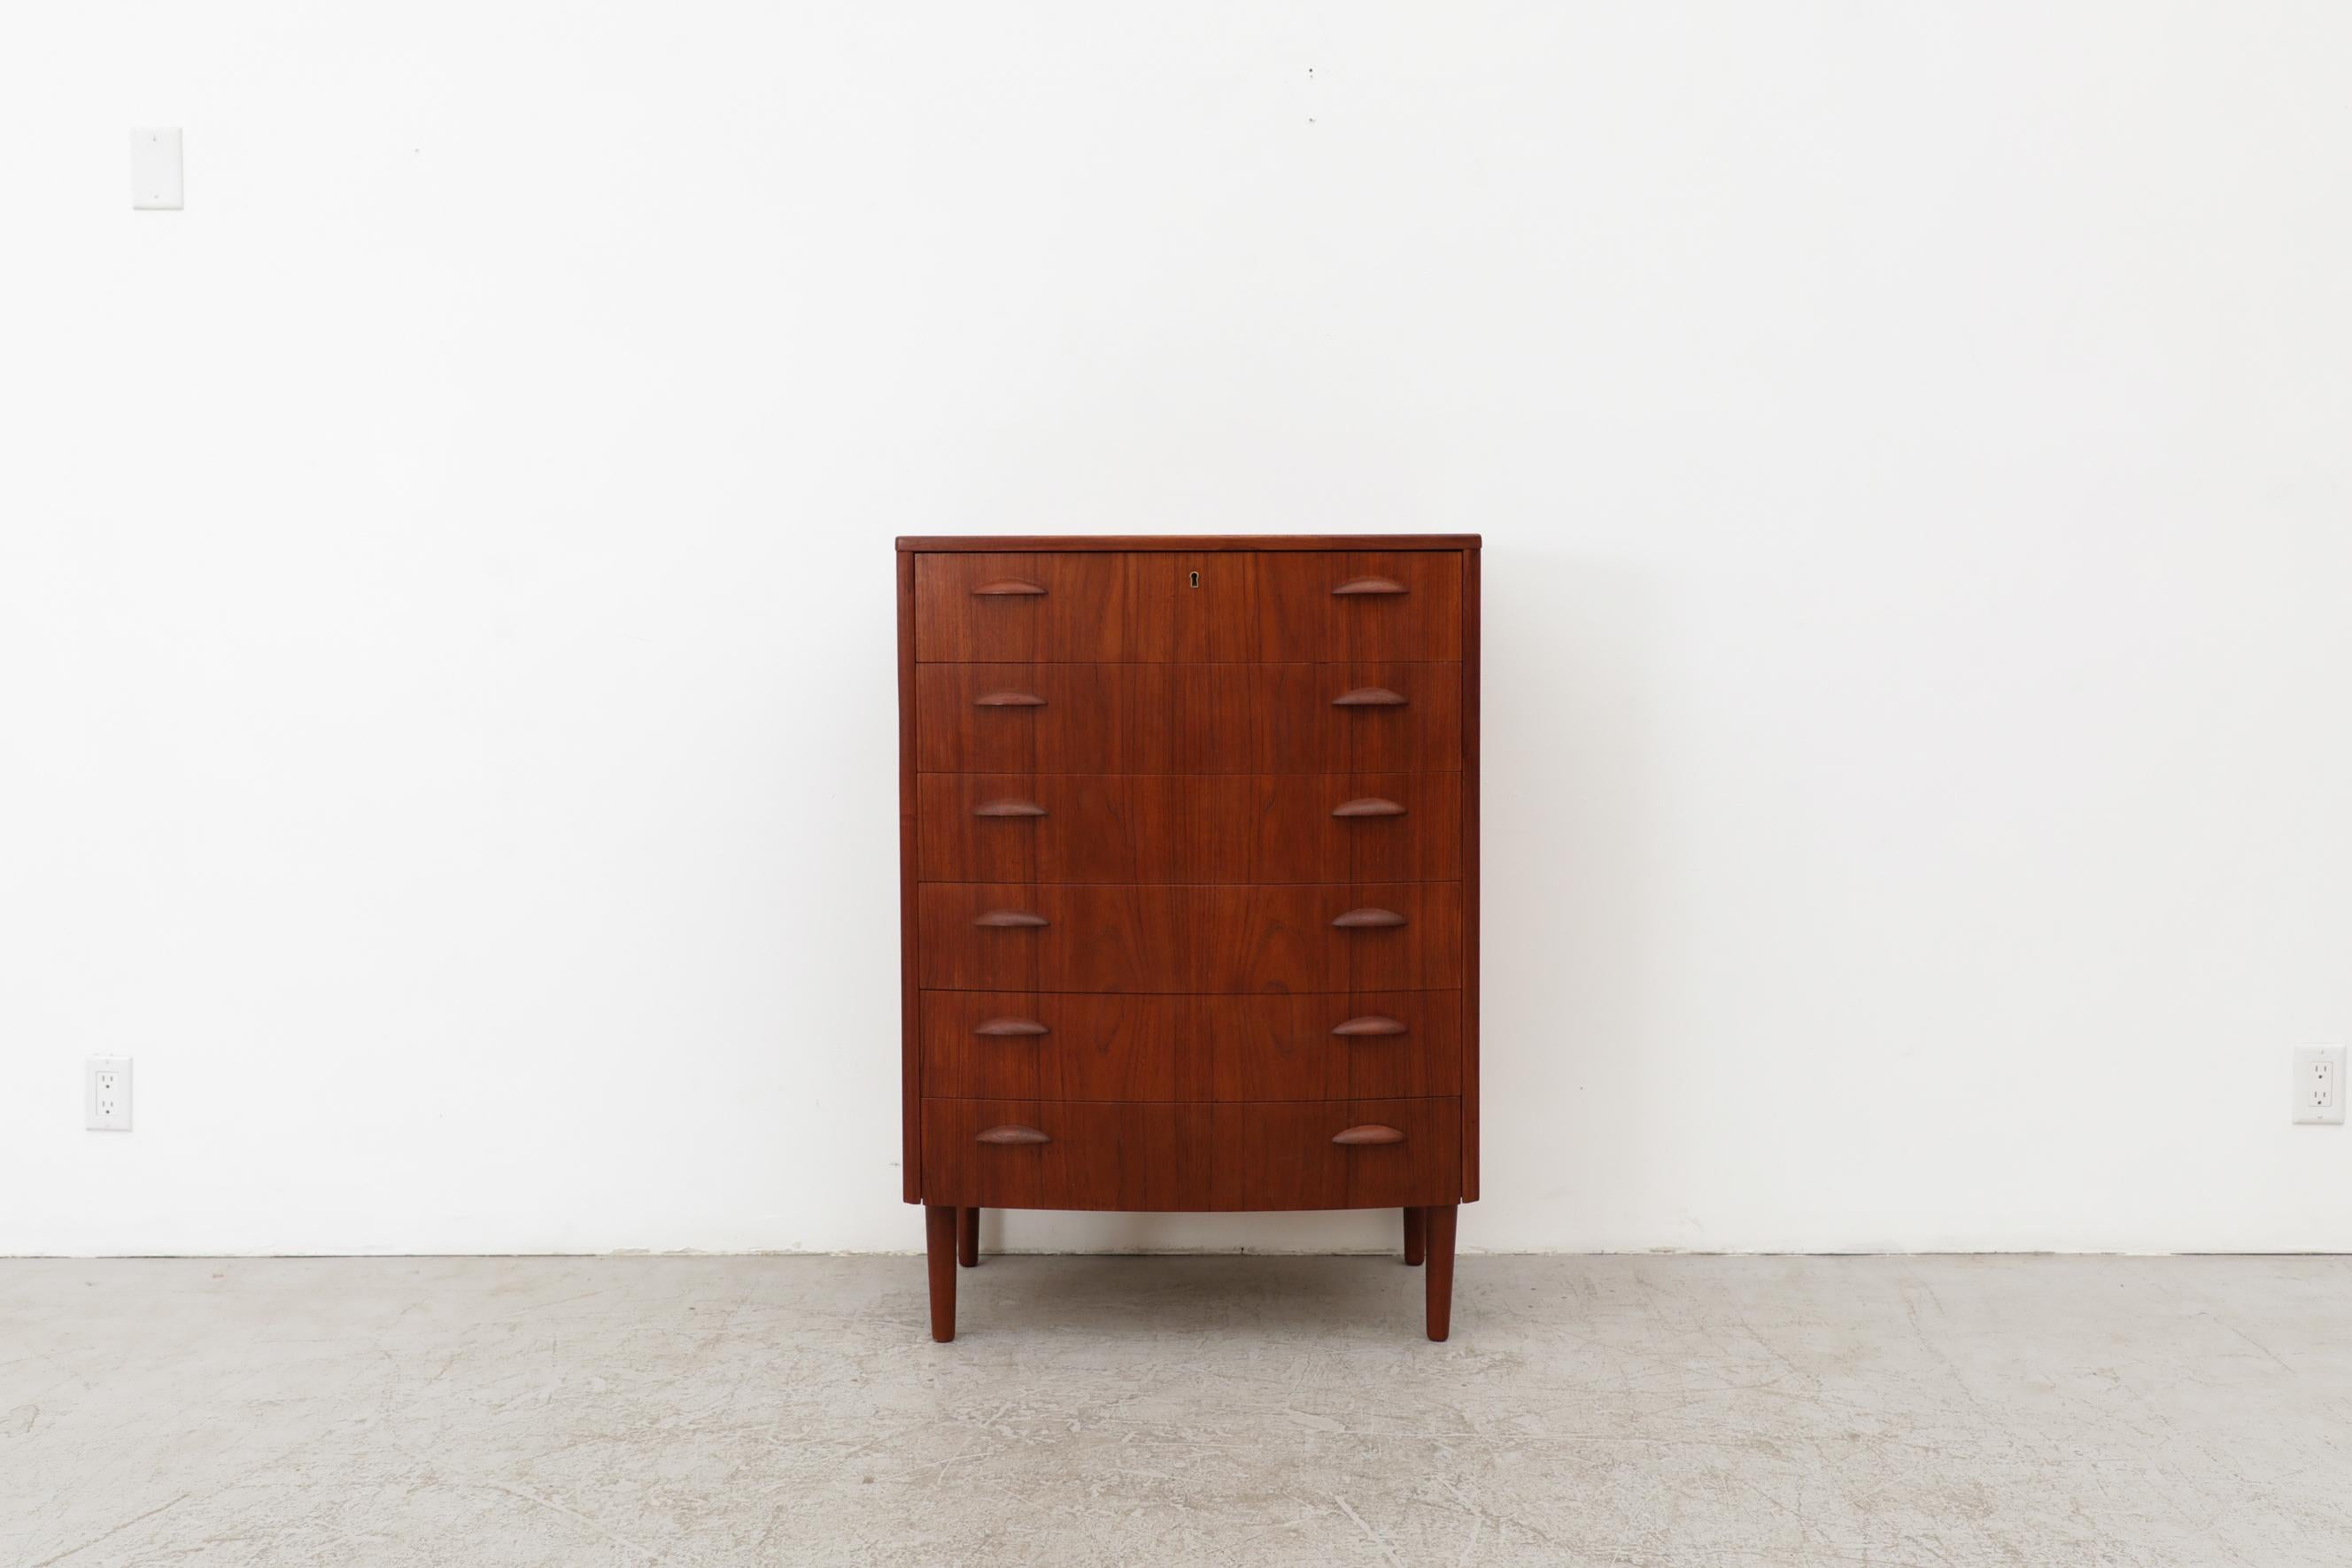 Kai Kristiansen inspired Danish teak 6-drawer tall dresser with continuous grain, organic carved hand pulls and short tapered legs. In original condition with some very light scratches and signs of wear, consistent with its age and use. Other tall